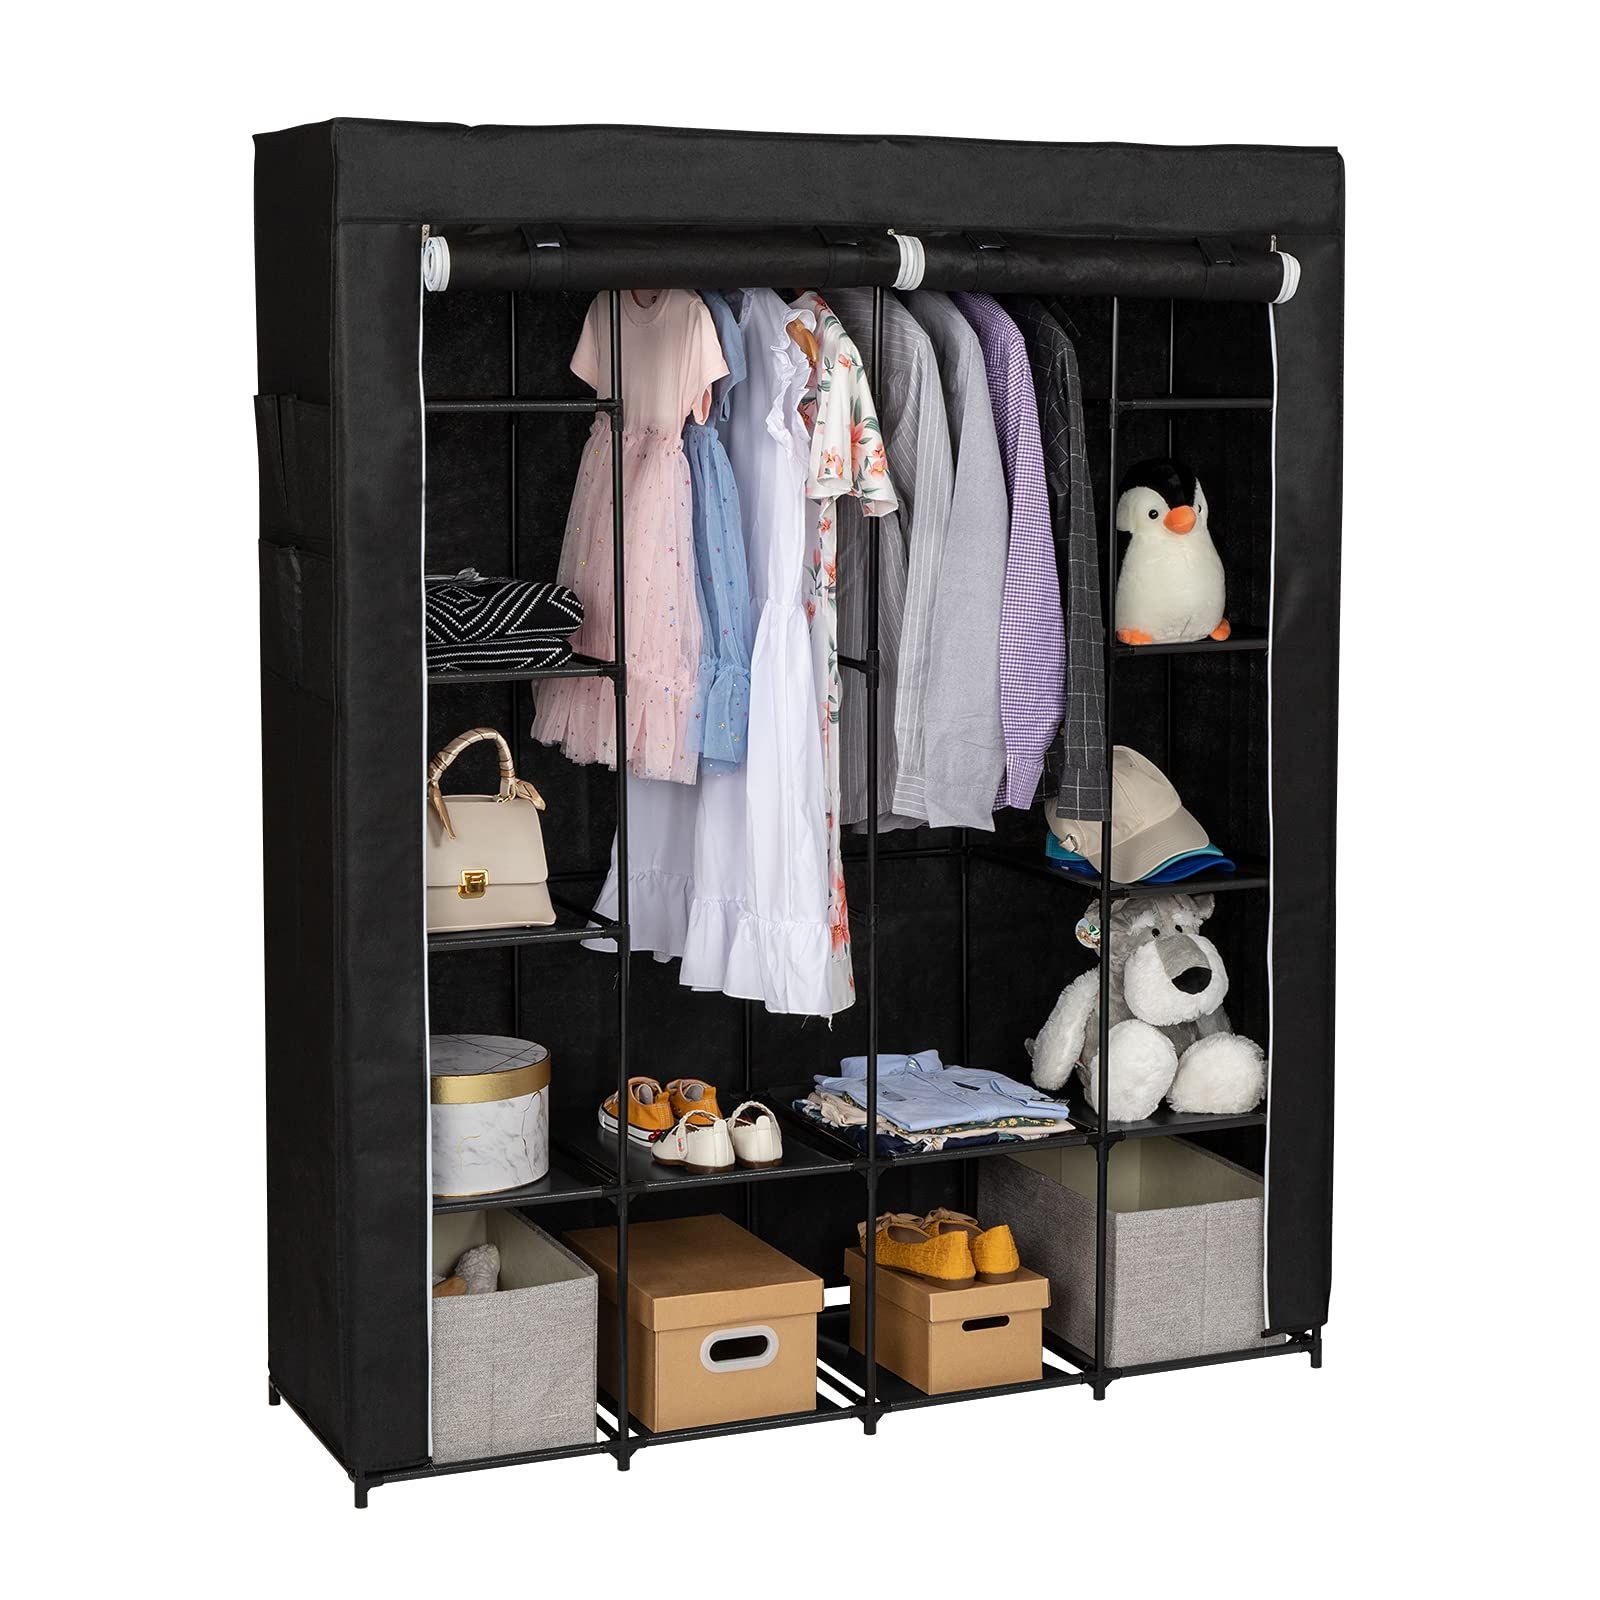 Latest 5 Tiers Wardrobes Regarding Amazon: Karl Home 5 Tiers Portable Closet, Non Woven Fabric Closet  Wardrobe, Storage Organizer With Shelves & Cover For Hanging Clothes, 56" L  X  (View 6 of 10)